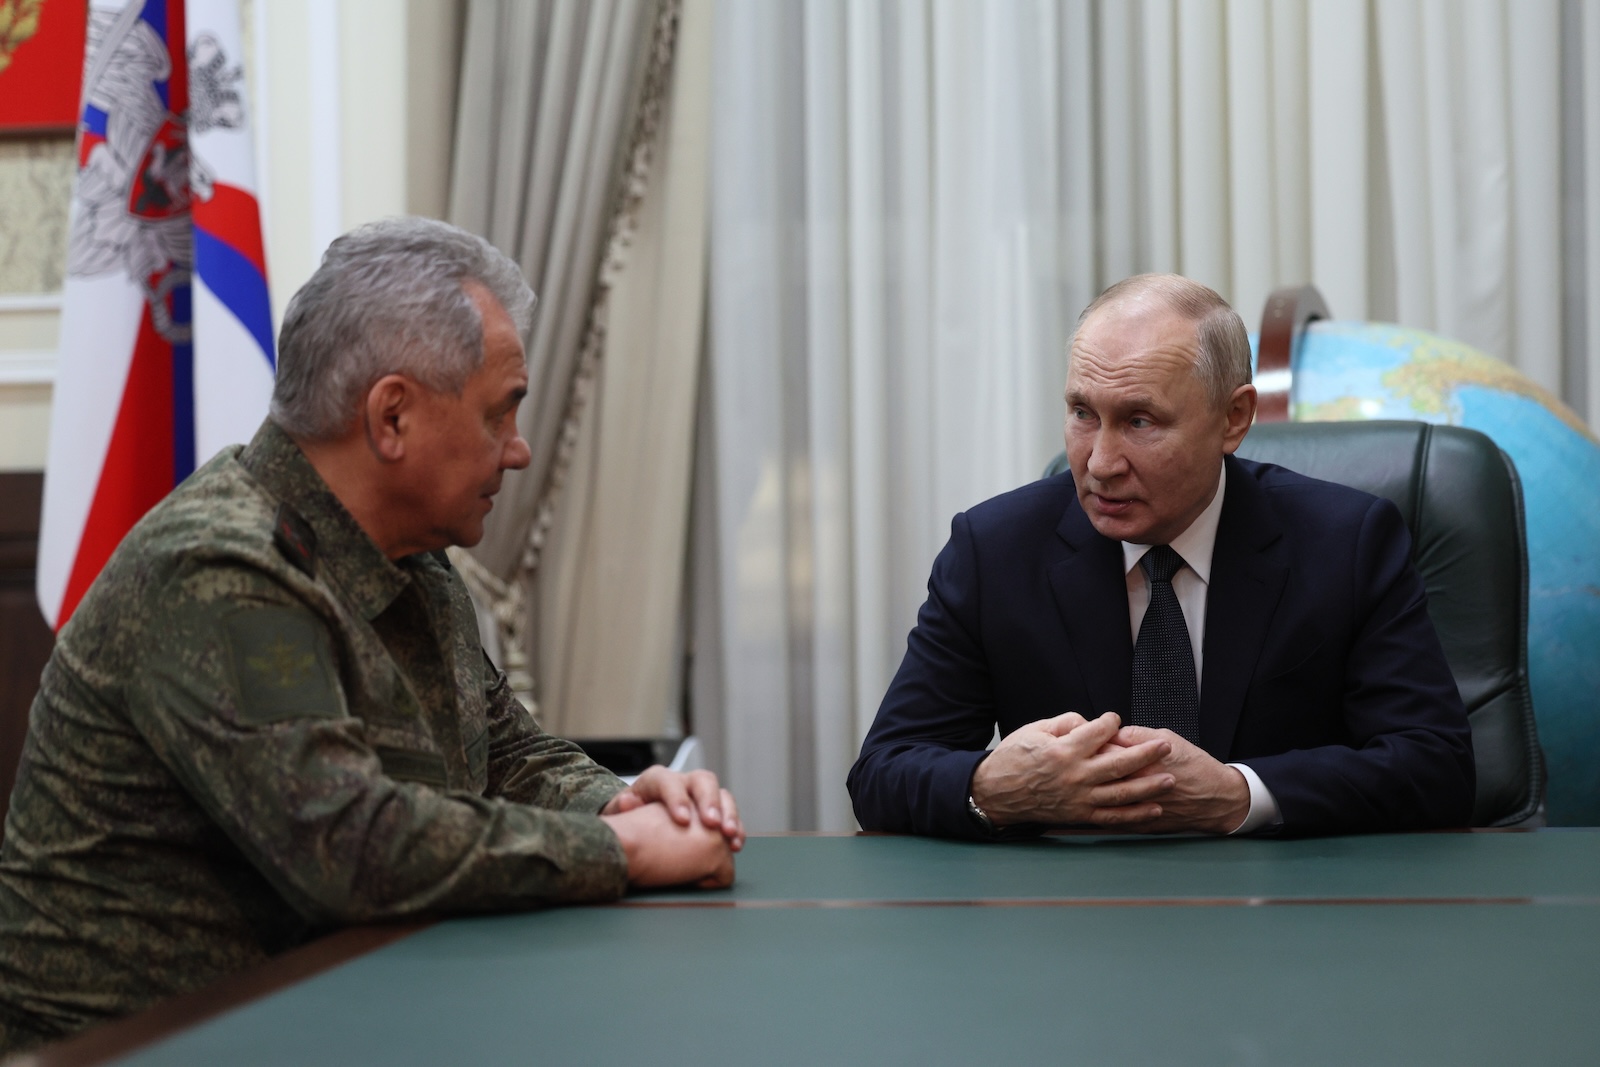 epa10967919 Russian President Vladimir Putin (R) and Defence Minister Sergei Shoigu attend a meeting at the headquarters of the group of forces taking part in the special military operation in Rostov-on-Don, Russia, late 09 November 2023 (issued 10 November 2023). On his way back from Kazakhstan, Vladimir Putin made a stopover in Rostov-on-Don, where he visited the headquarters of the Southern Military District and was briefed on the progress of the special military operation, shown new weapons samples of military hardware, presidential press secretary Dmitry Peskov said.  EPA/GAVRIIL GRIGOROV/SPUTNIK/KREMLIN POOL / POOL MANDATORY CREDIT